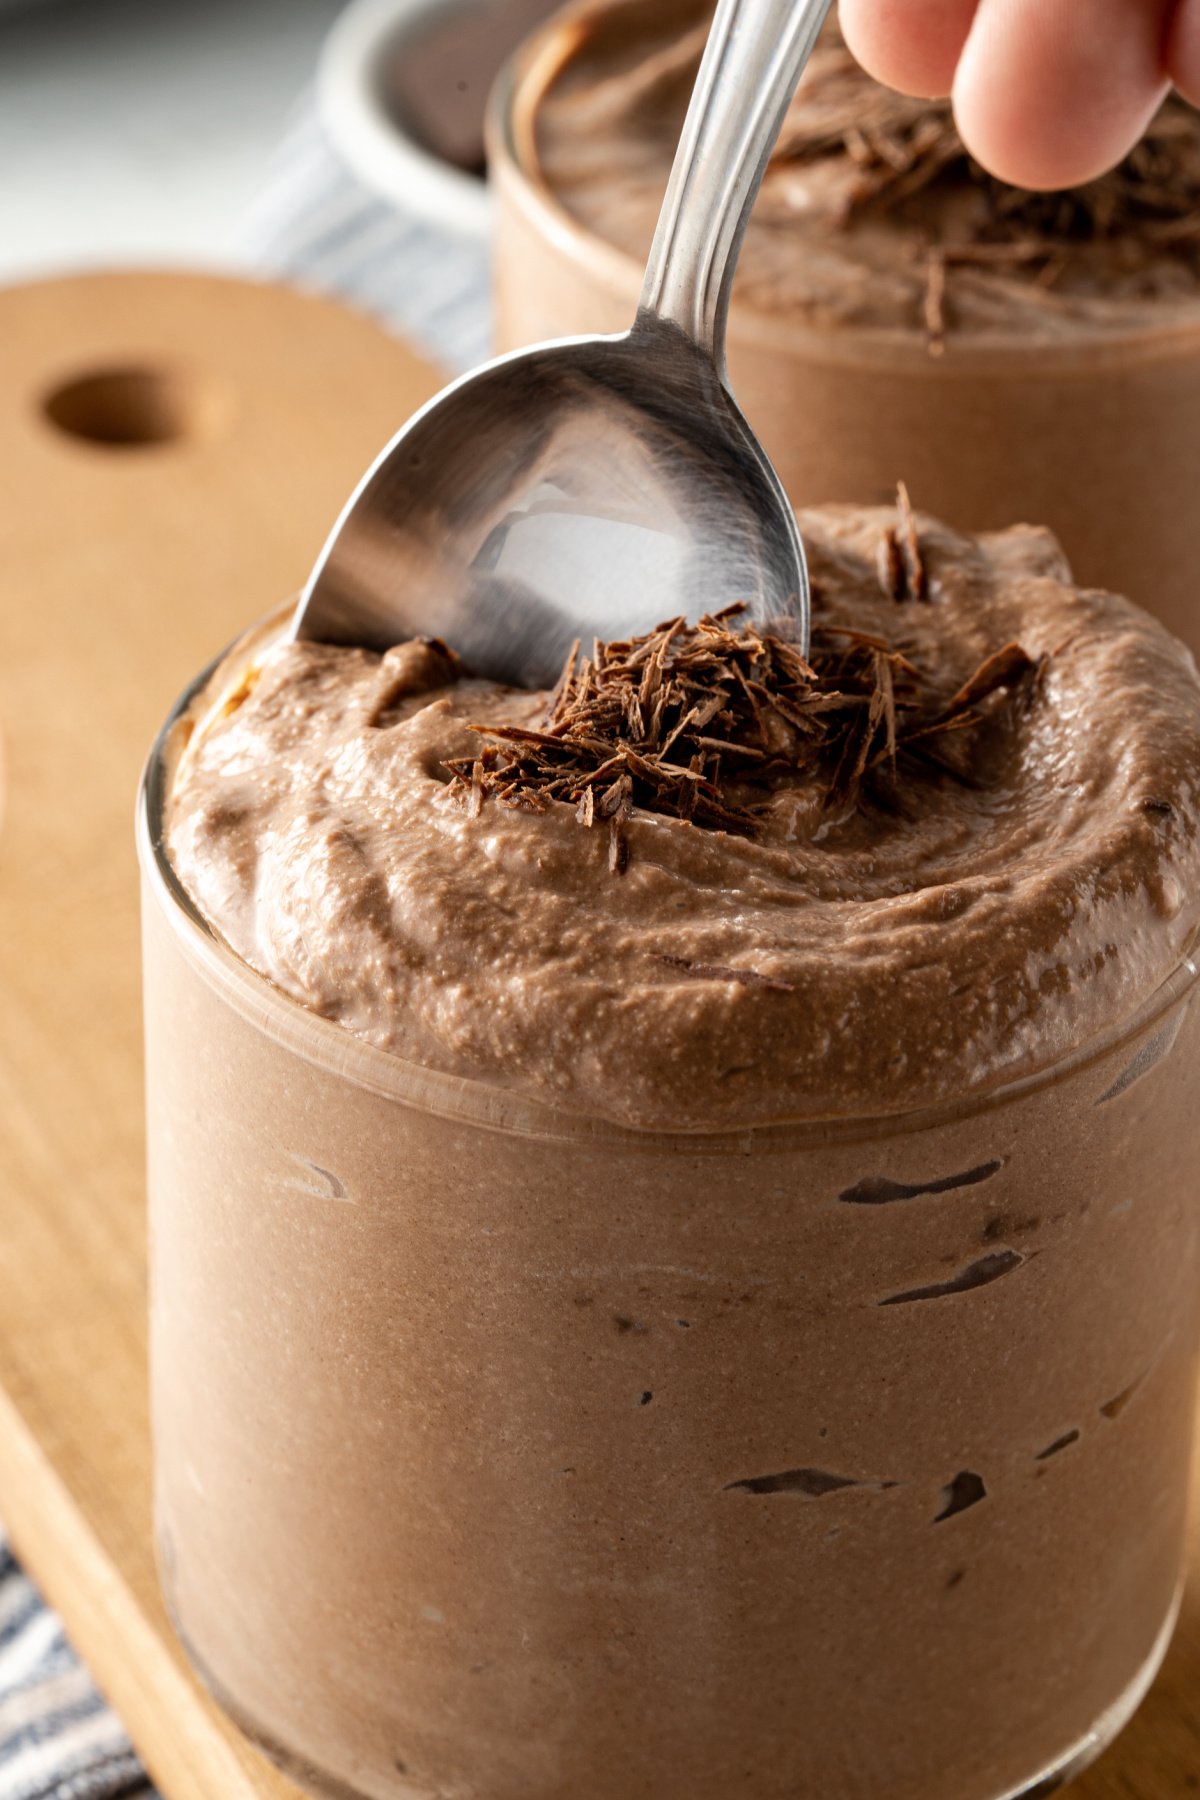 low carb keto friendly chocolate mousse comes out so light and fluffy